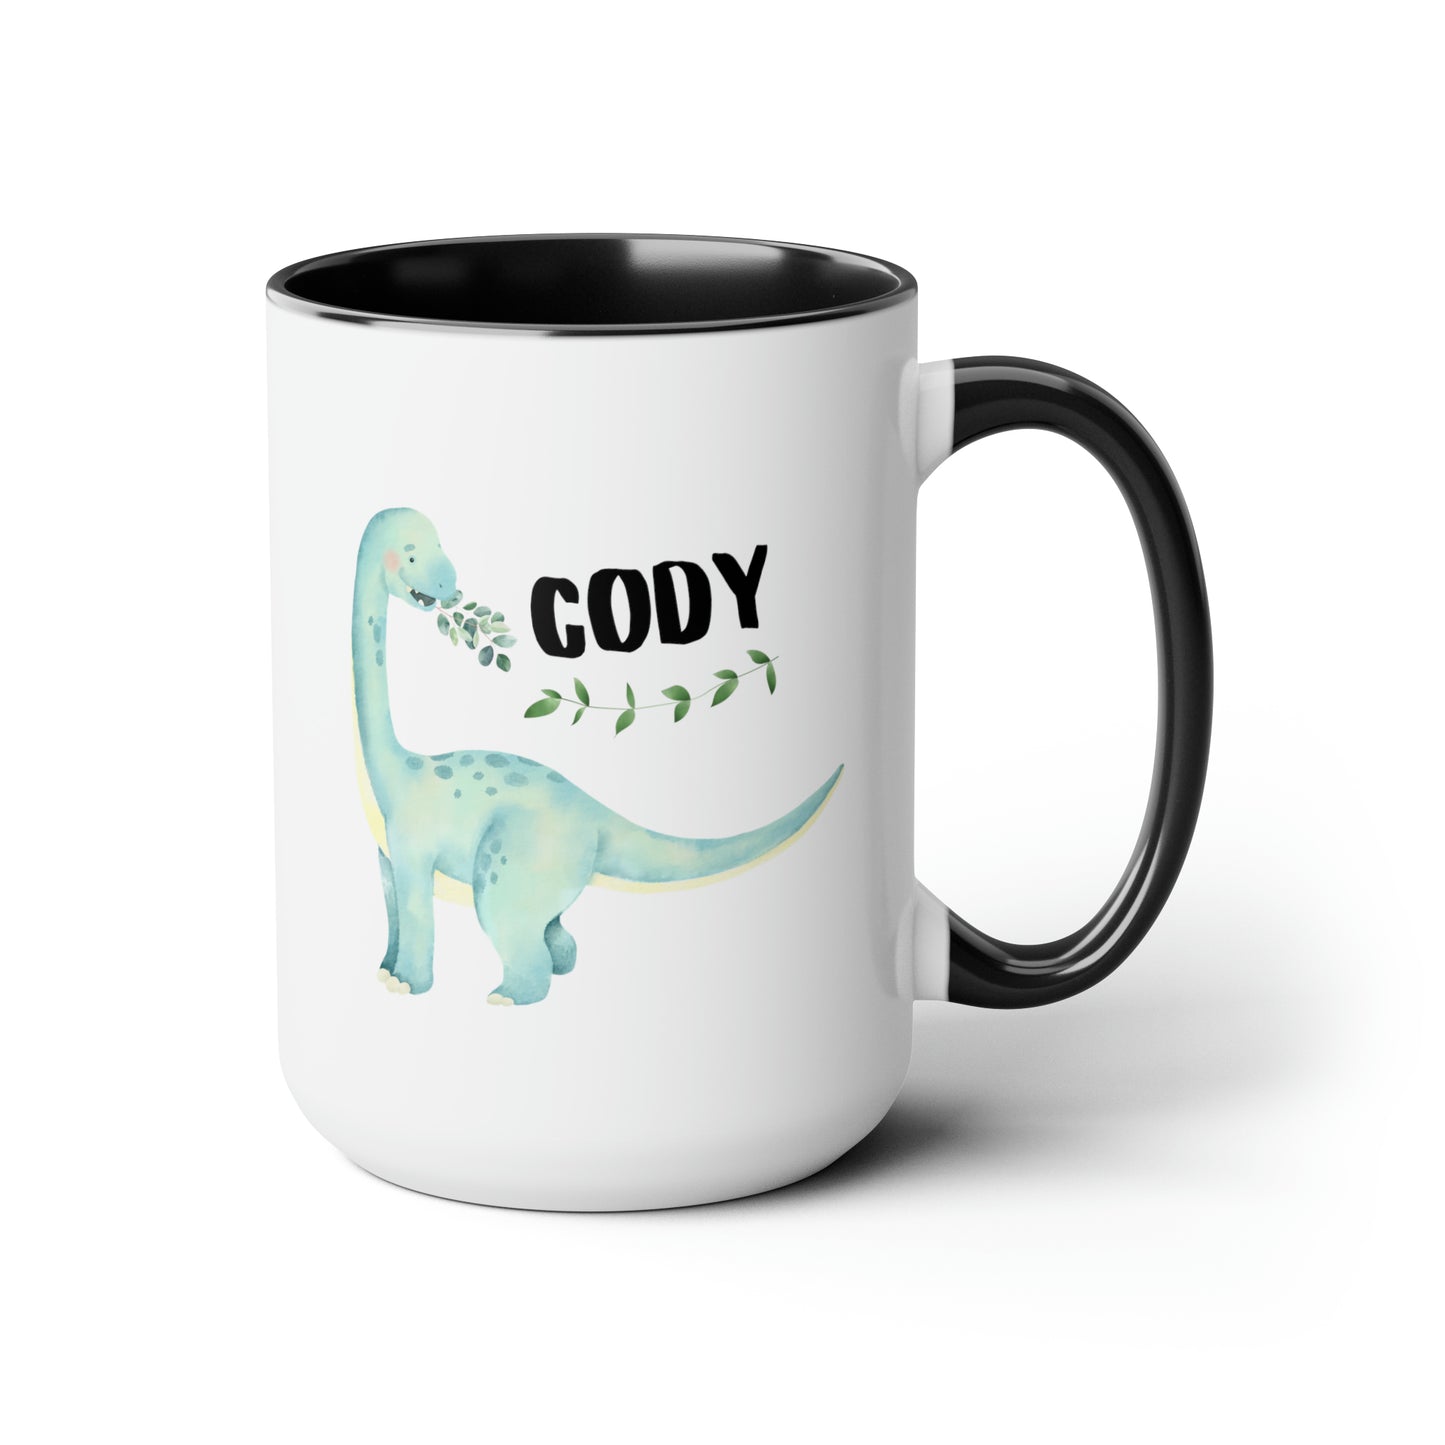 Dinosaur Name 15oz white with black accent funny large coffee mug gift for boys women mom kids customize personalize waveywares wavey wares wavywares wavy wares